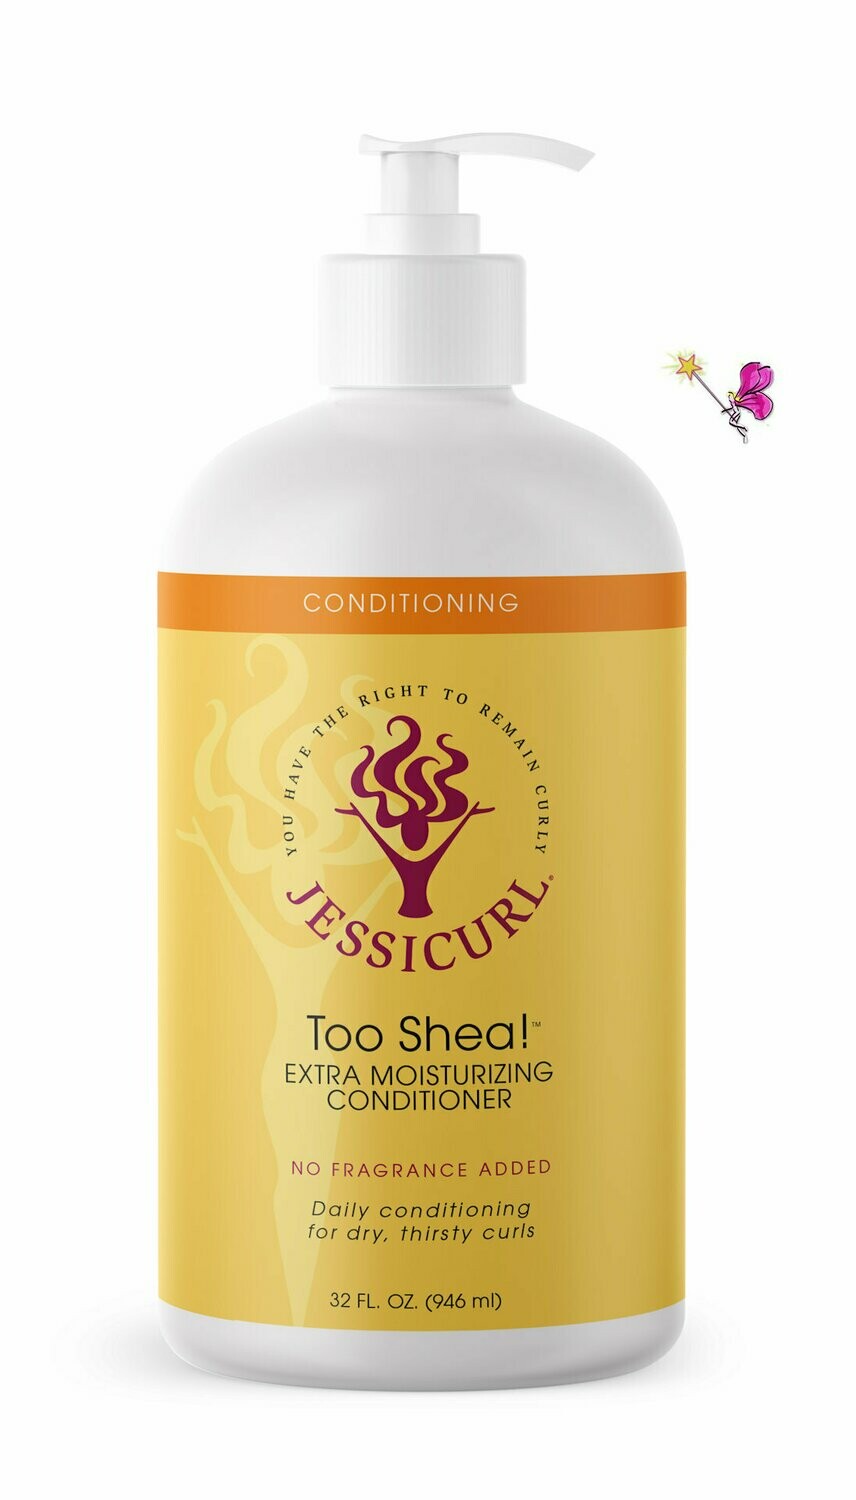 Jessicurl Too Shea! Conditioner No Fragrance Added 946ml (32oz)